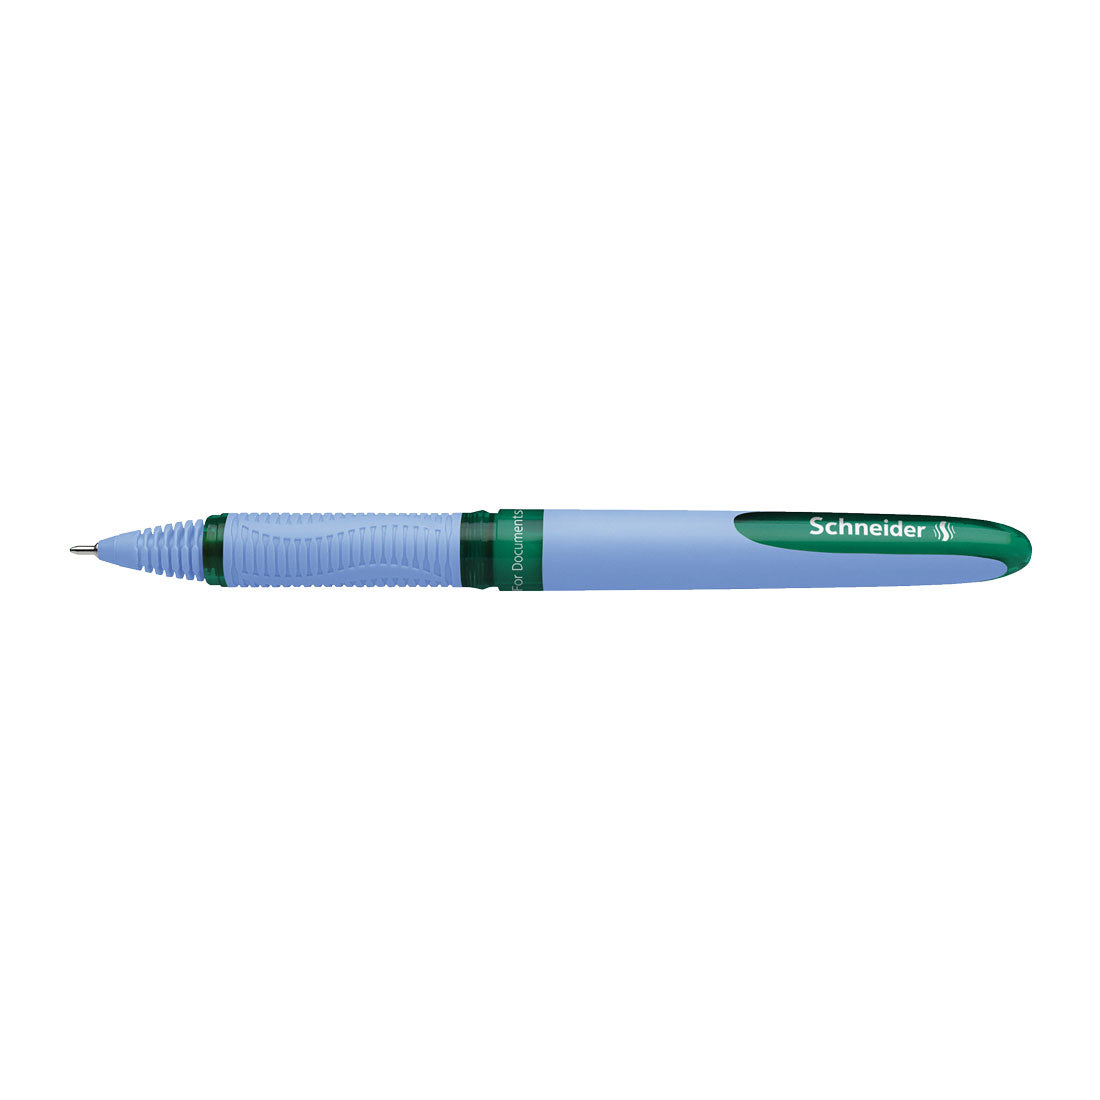 One Hybrid N Rollerball 0.5mm, Box of 10#colour_green